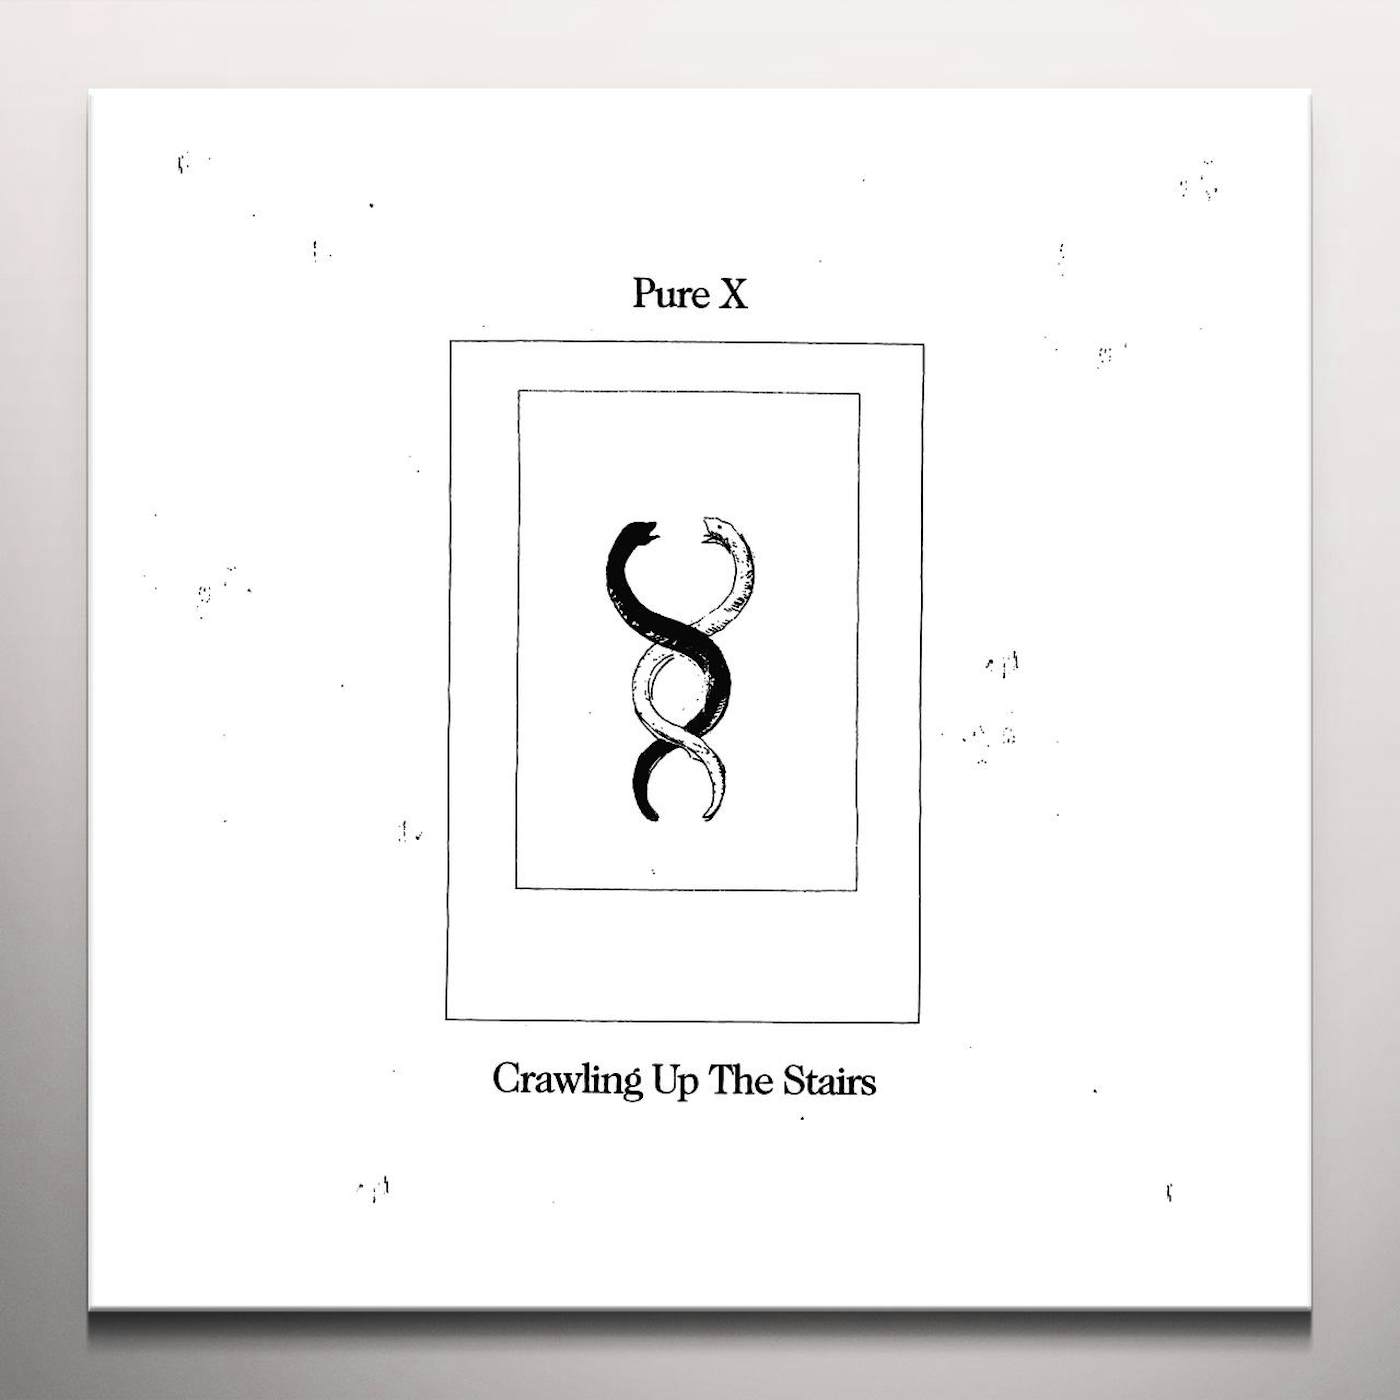 Pure X Crawling up the Stairs Vinyl Record